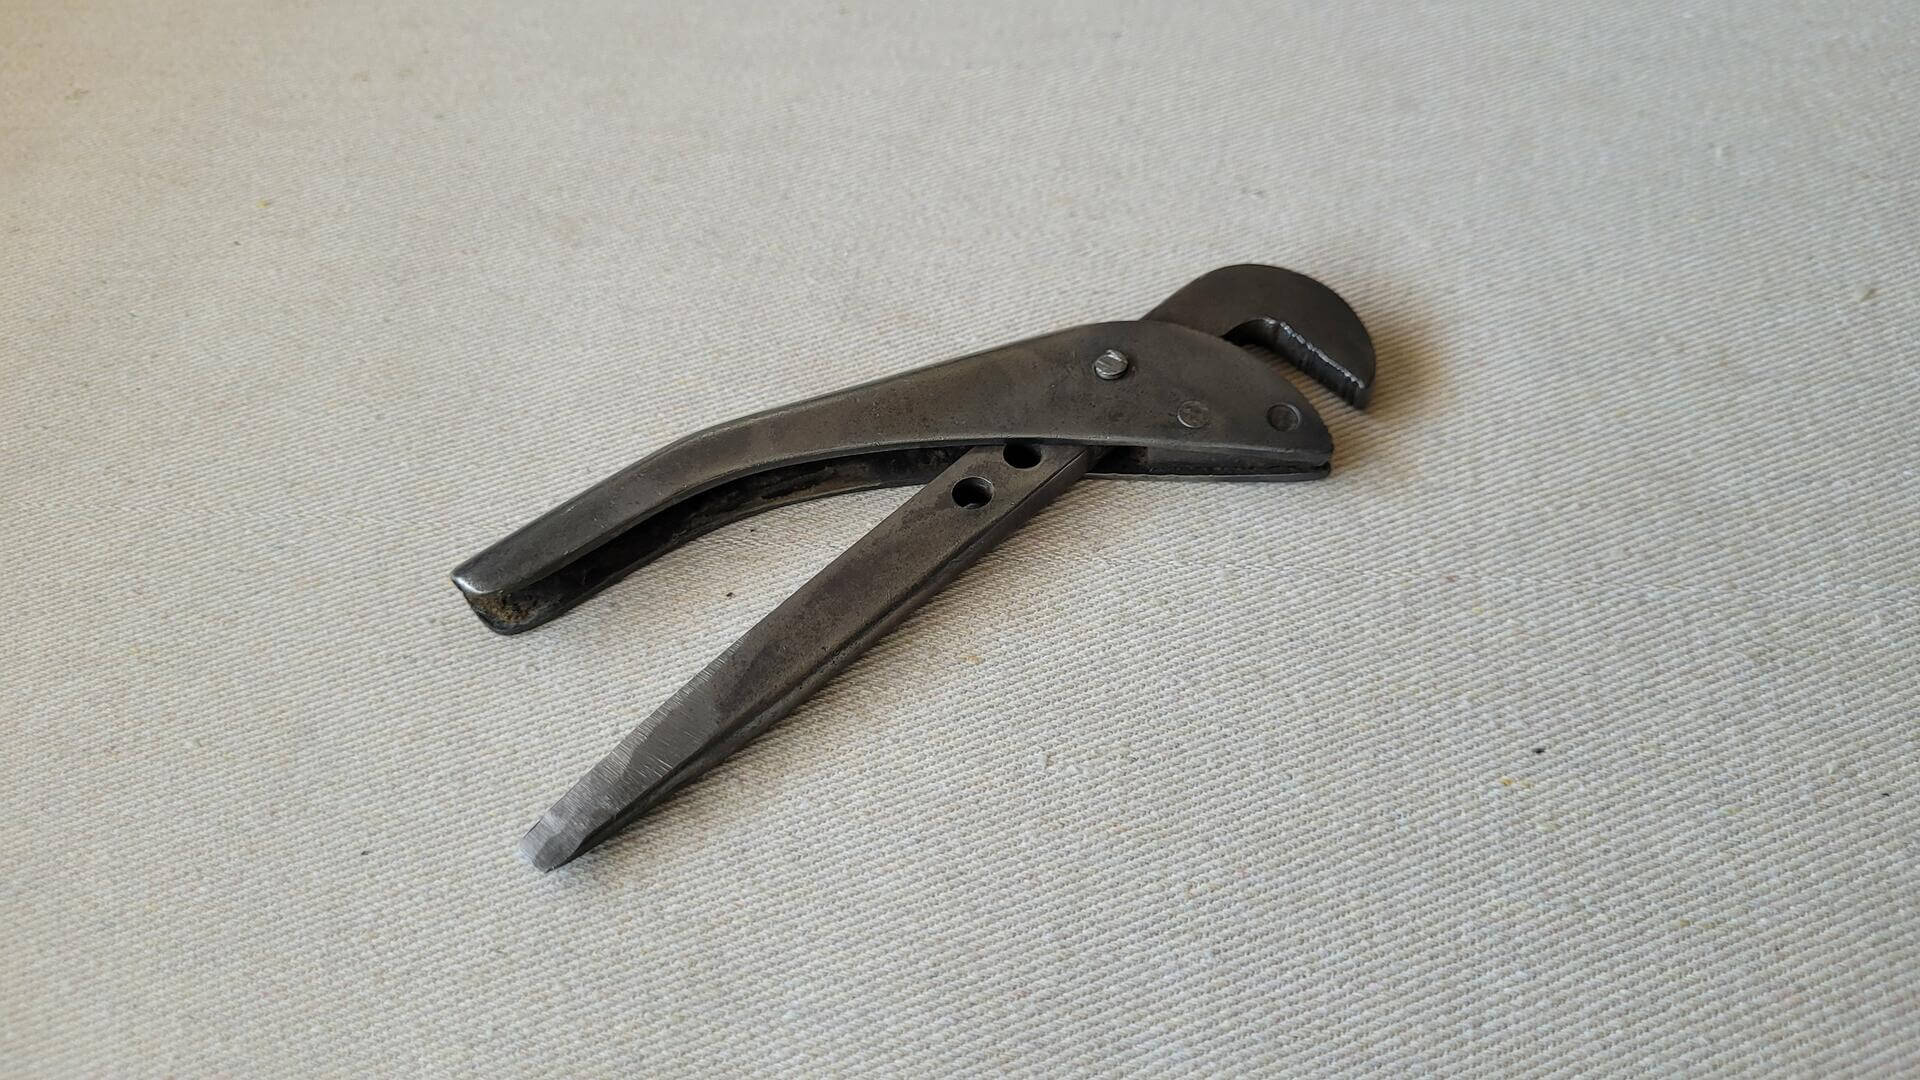 footprint-original-pattern-adjustable-spanner-wrench-antique-vintage-made-in-sheffield-england-collectible-plumbing-tool